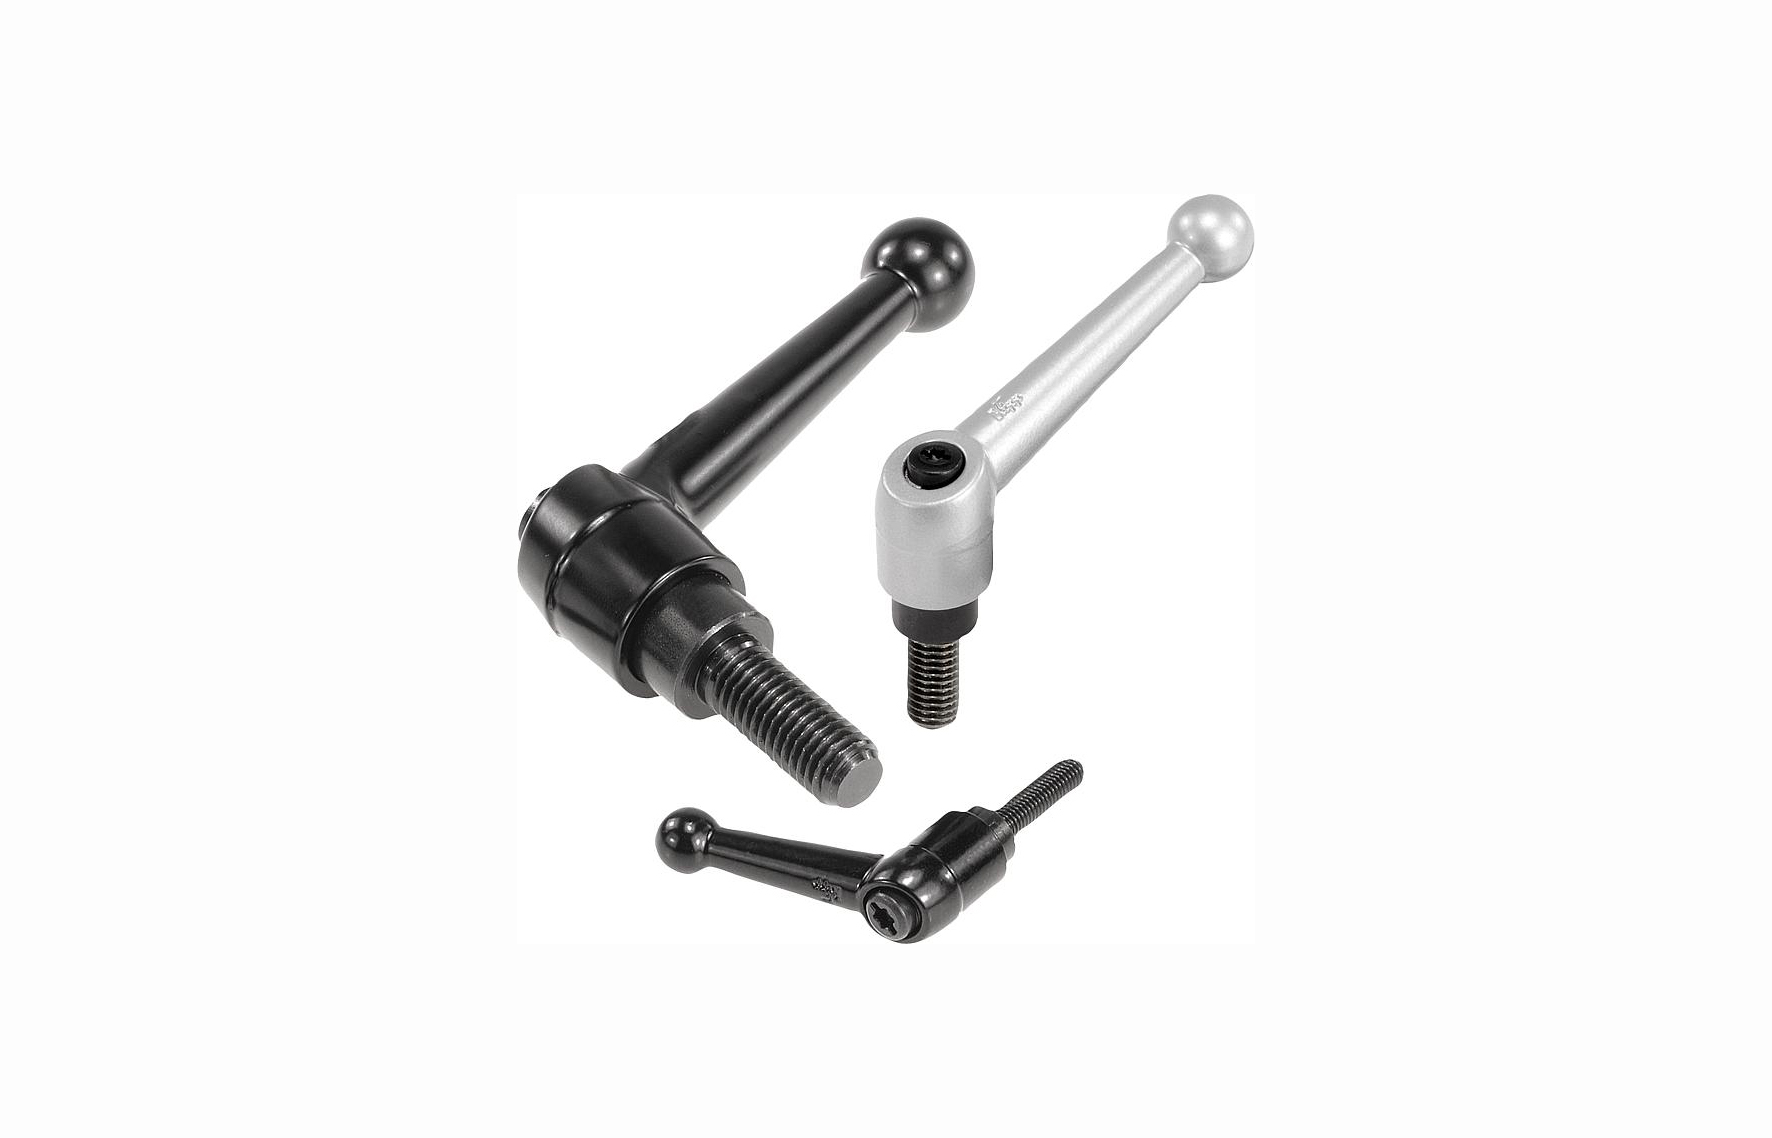 K0116 Clamping levers